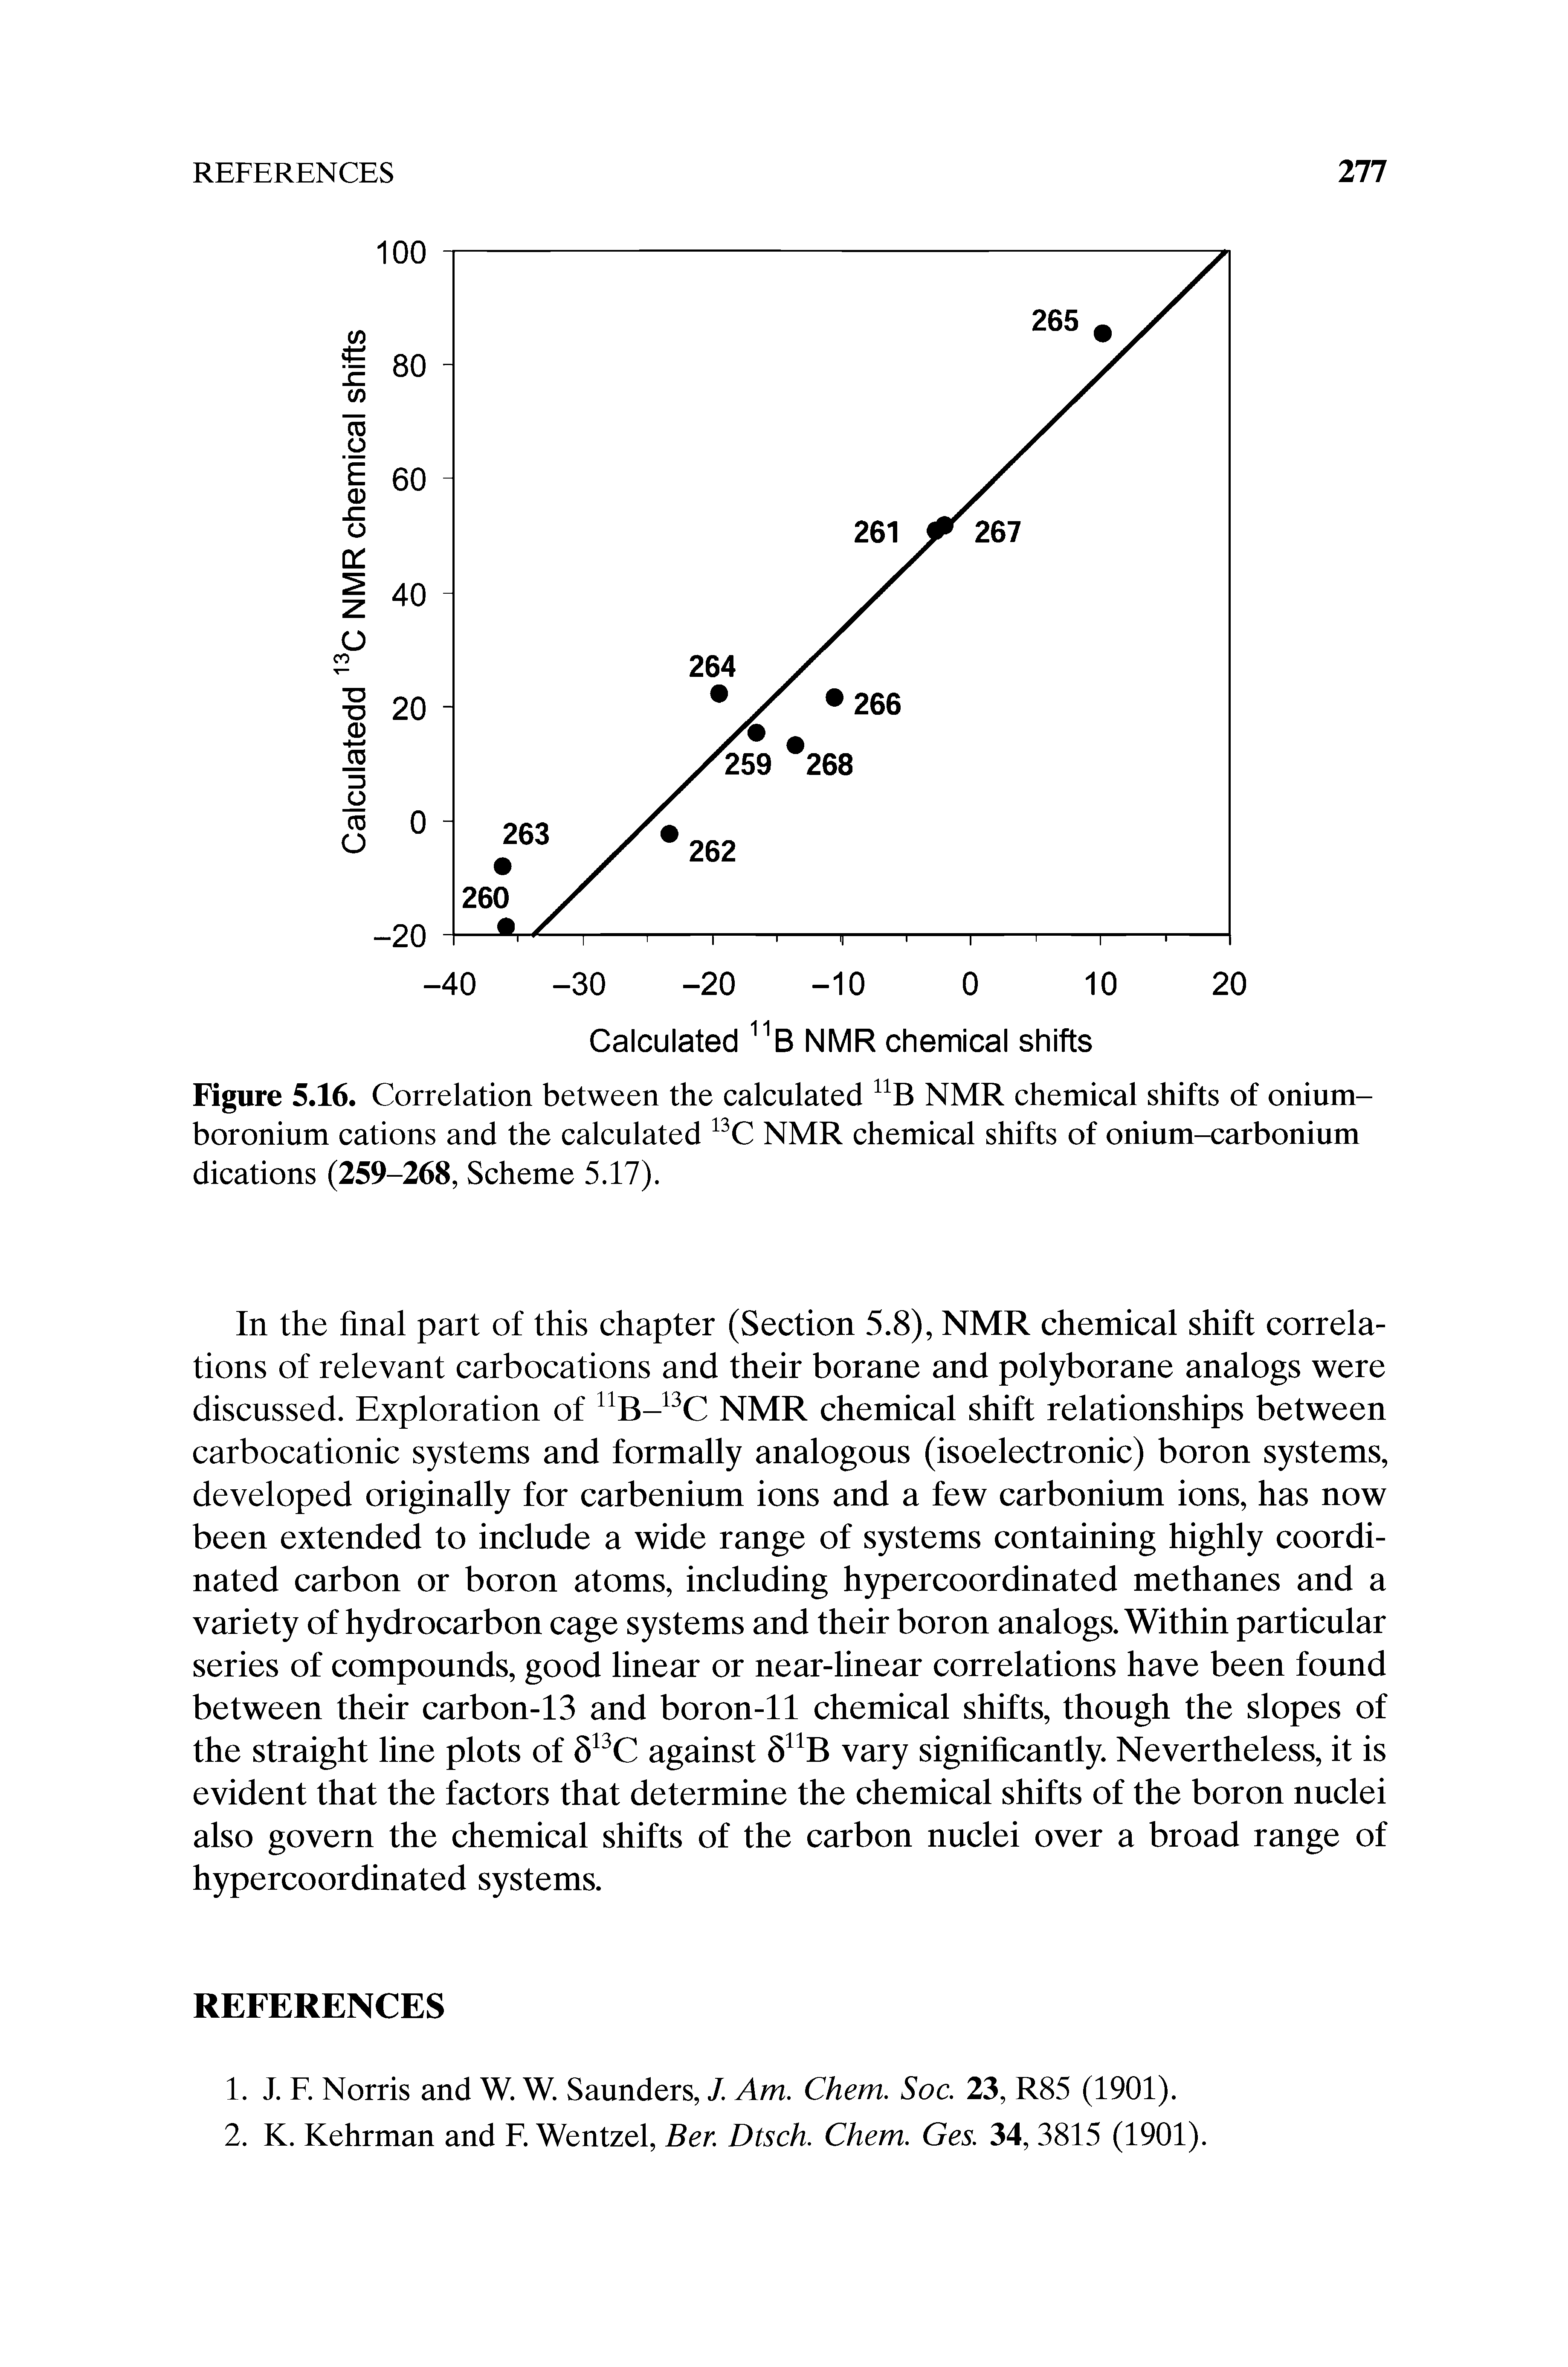 Figure 5.16. Correlation between the calculated NMR chemical shifts of onium-boronium cations and the calculated NMR chemical shifts of onium-carbonium dications (259-268, Scheme 5.17).